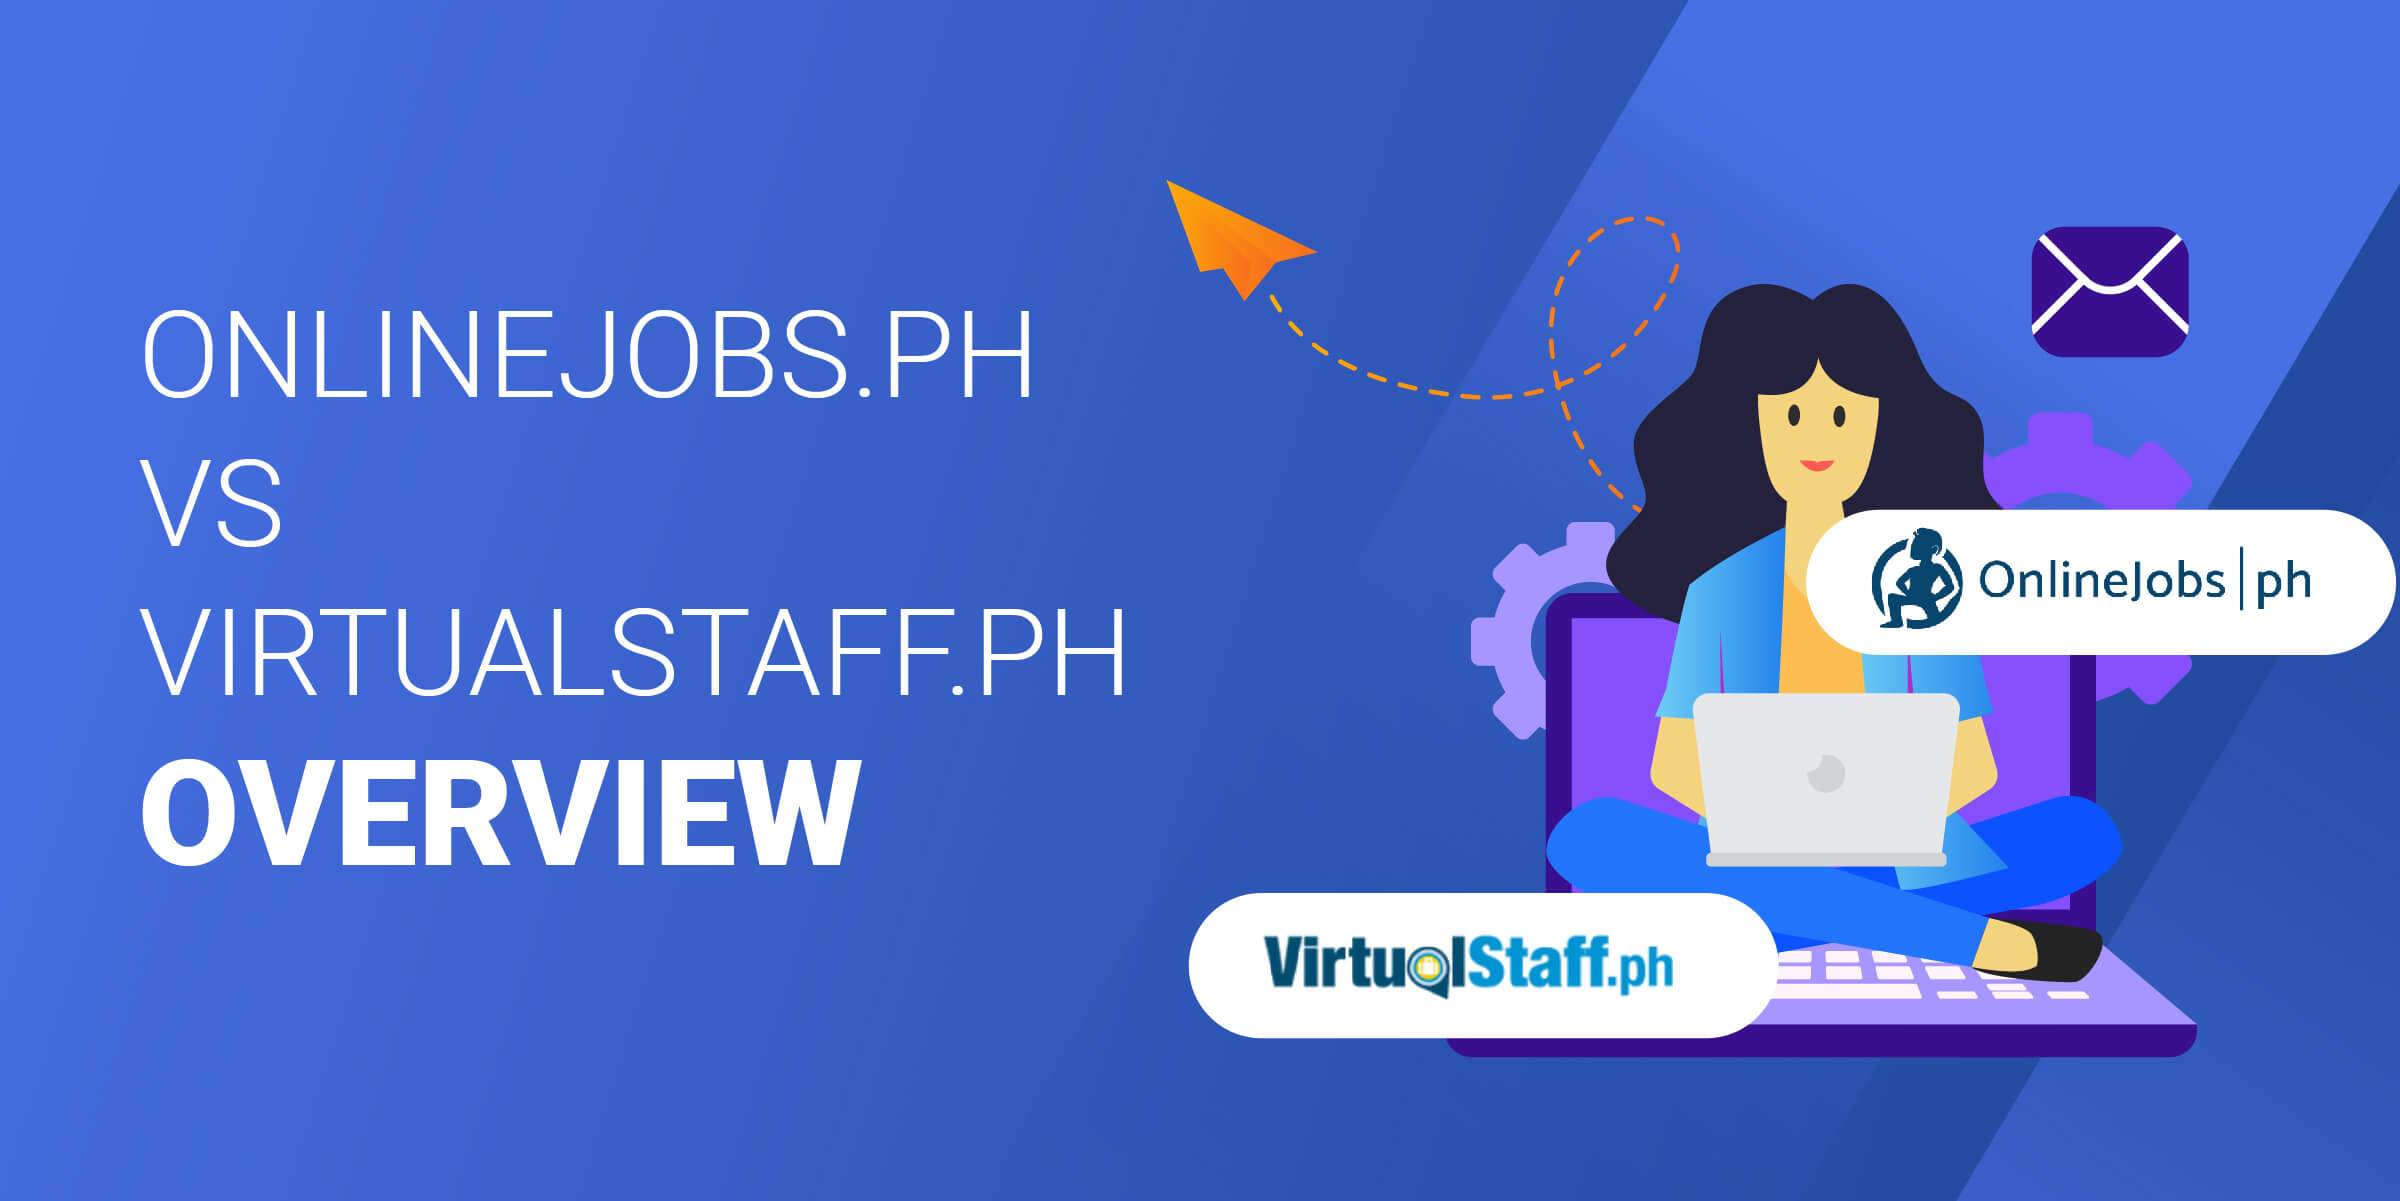 OnlineJobs vs VirtualStaff Overview